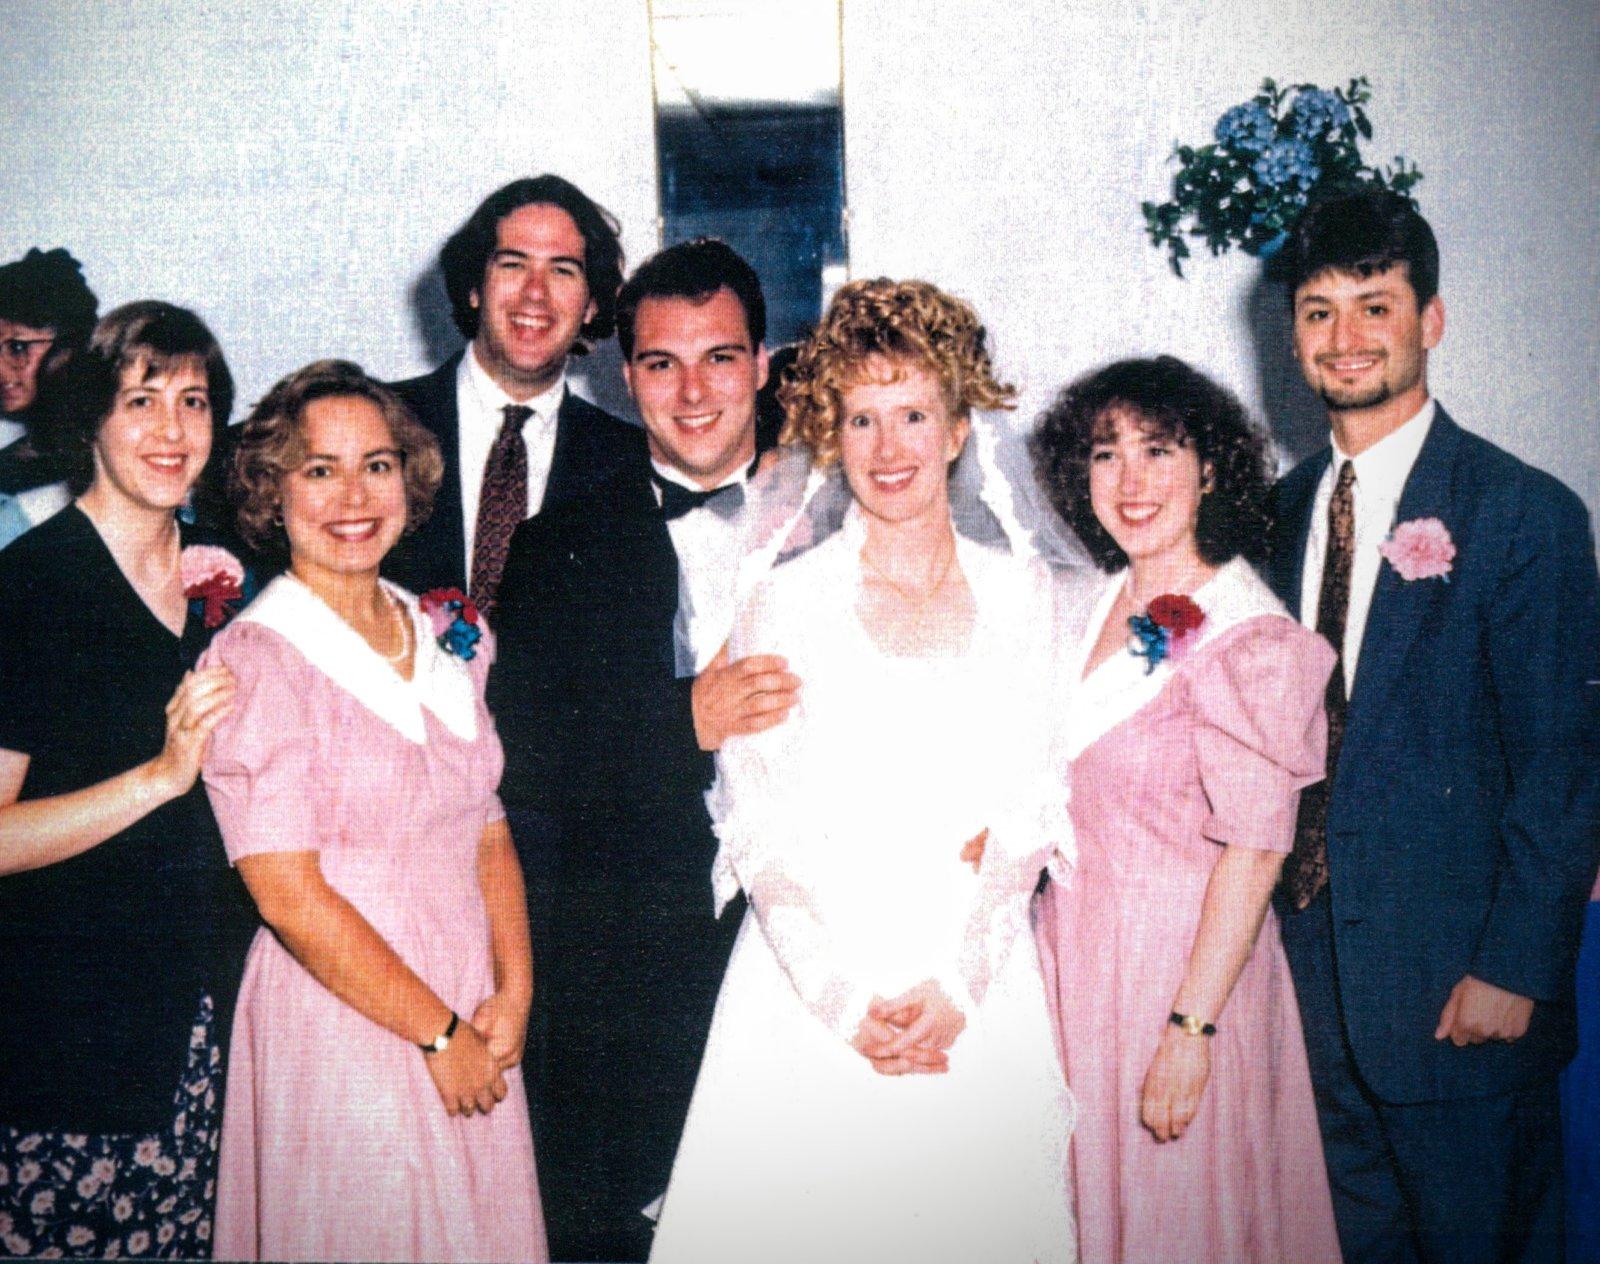 Our wedding in 1995 with the Williams Crew.